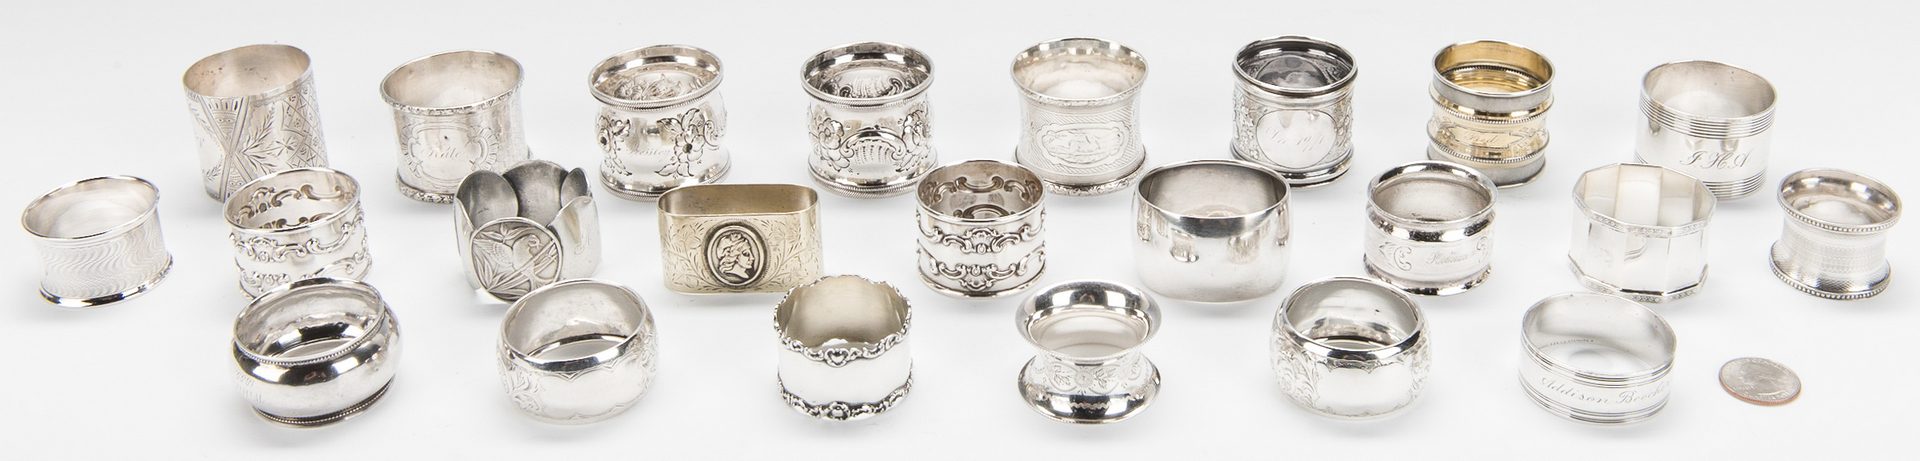 Lot 217: Collection of 23 Silver Napkin Rings